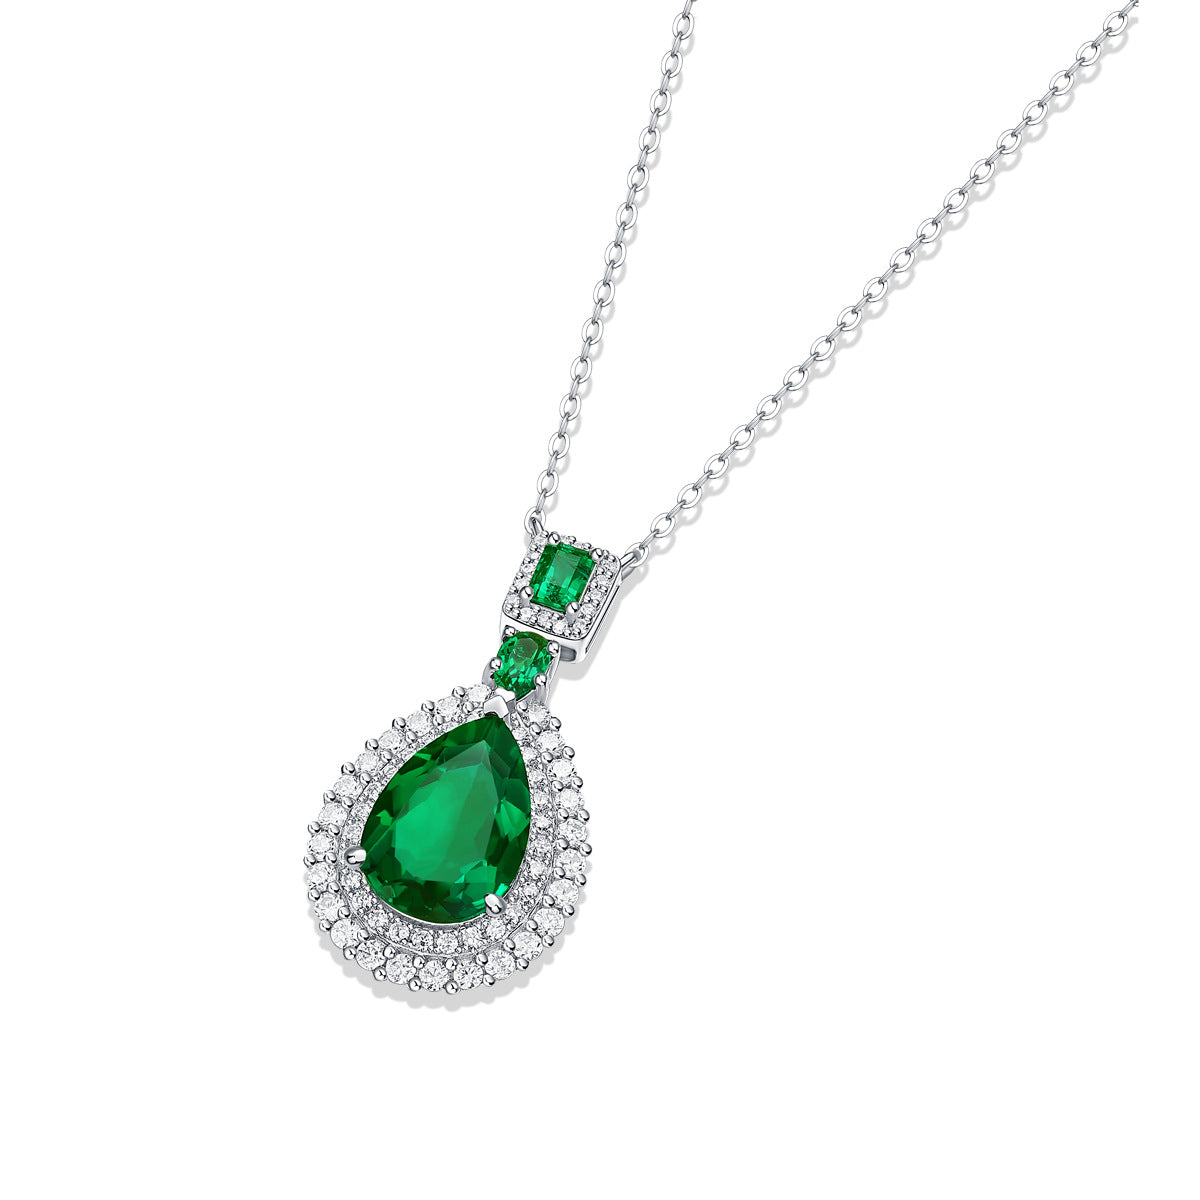 Pear Shaped Emerald Necklace - HERS